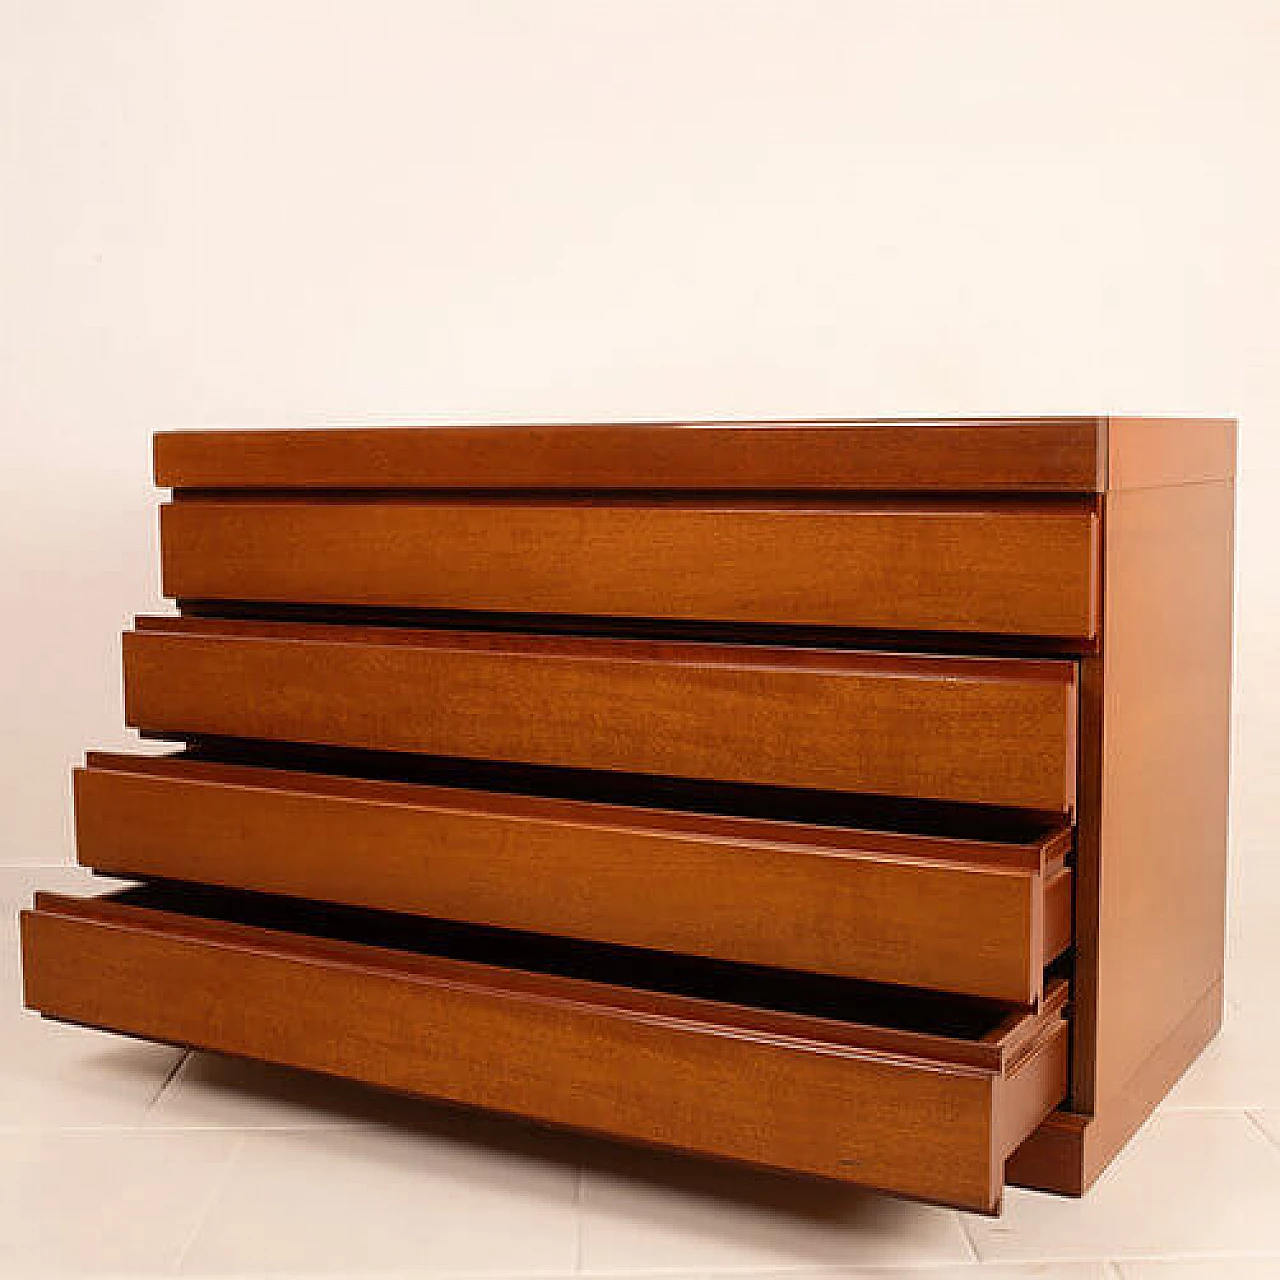 Programma S11 chest of drawers in walnut by Angelo Mangiarotti for Sorgente dei Mobili, 1970s 12